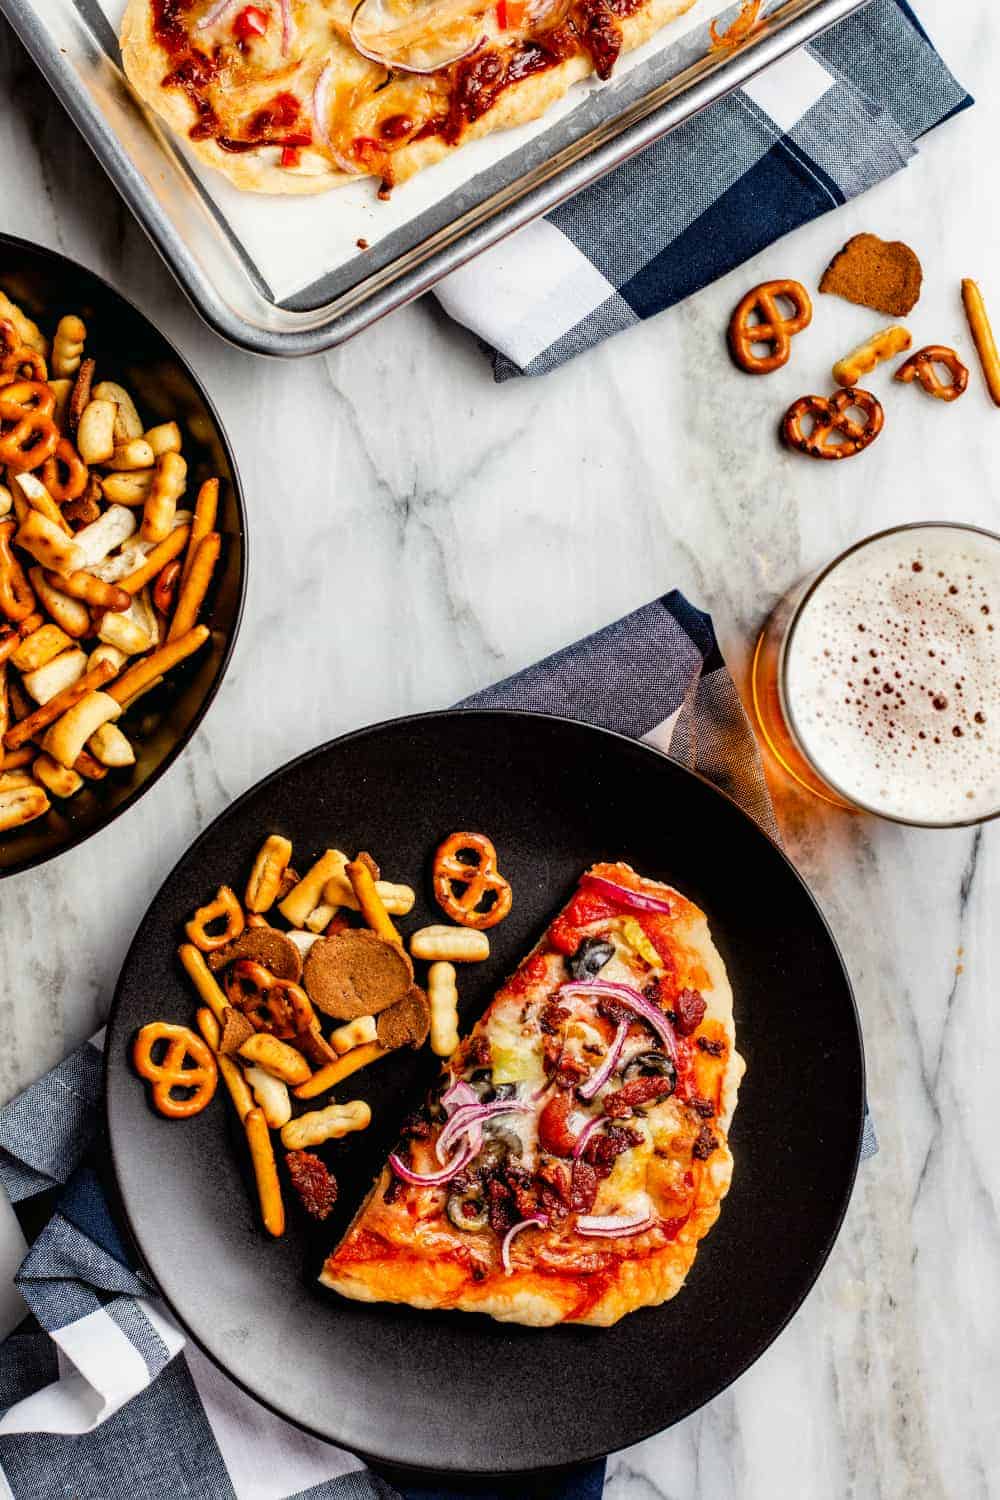 Homemade pizzas served with snack mix and drinks